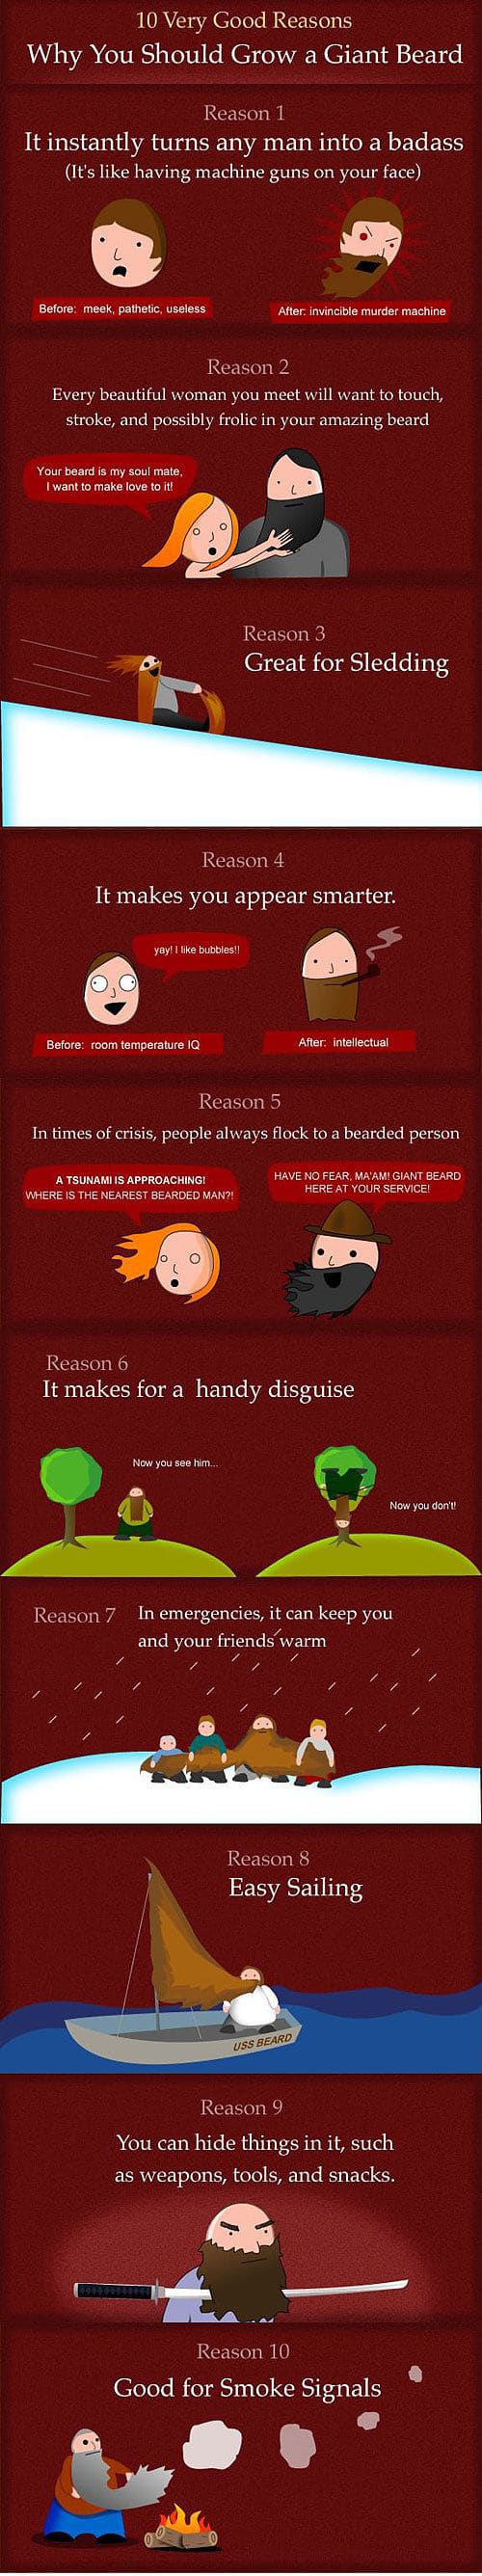 10 Good Reasons Why You Should Grow A Giant Beard [Infographic]